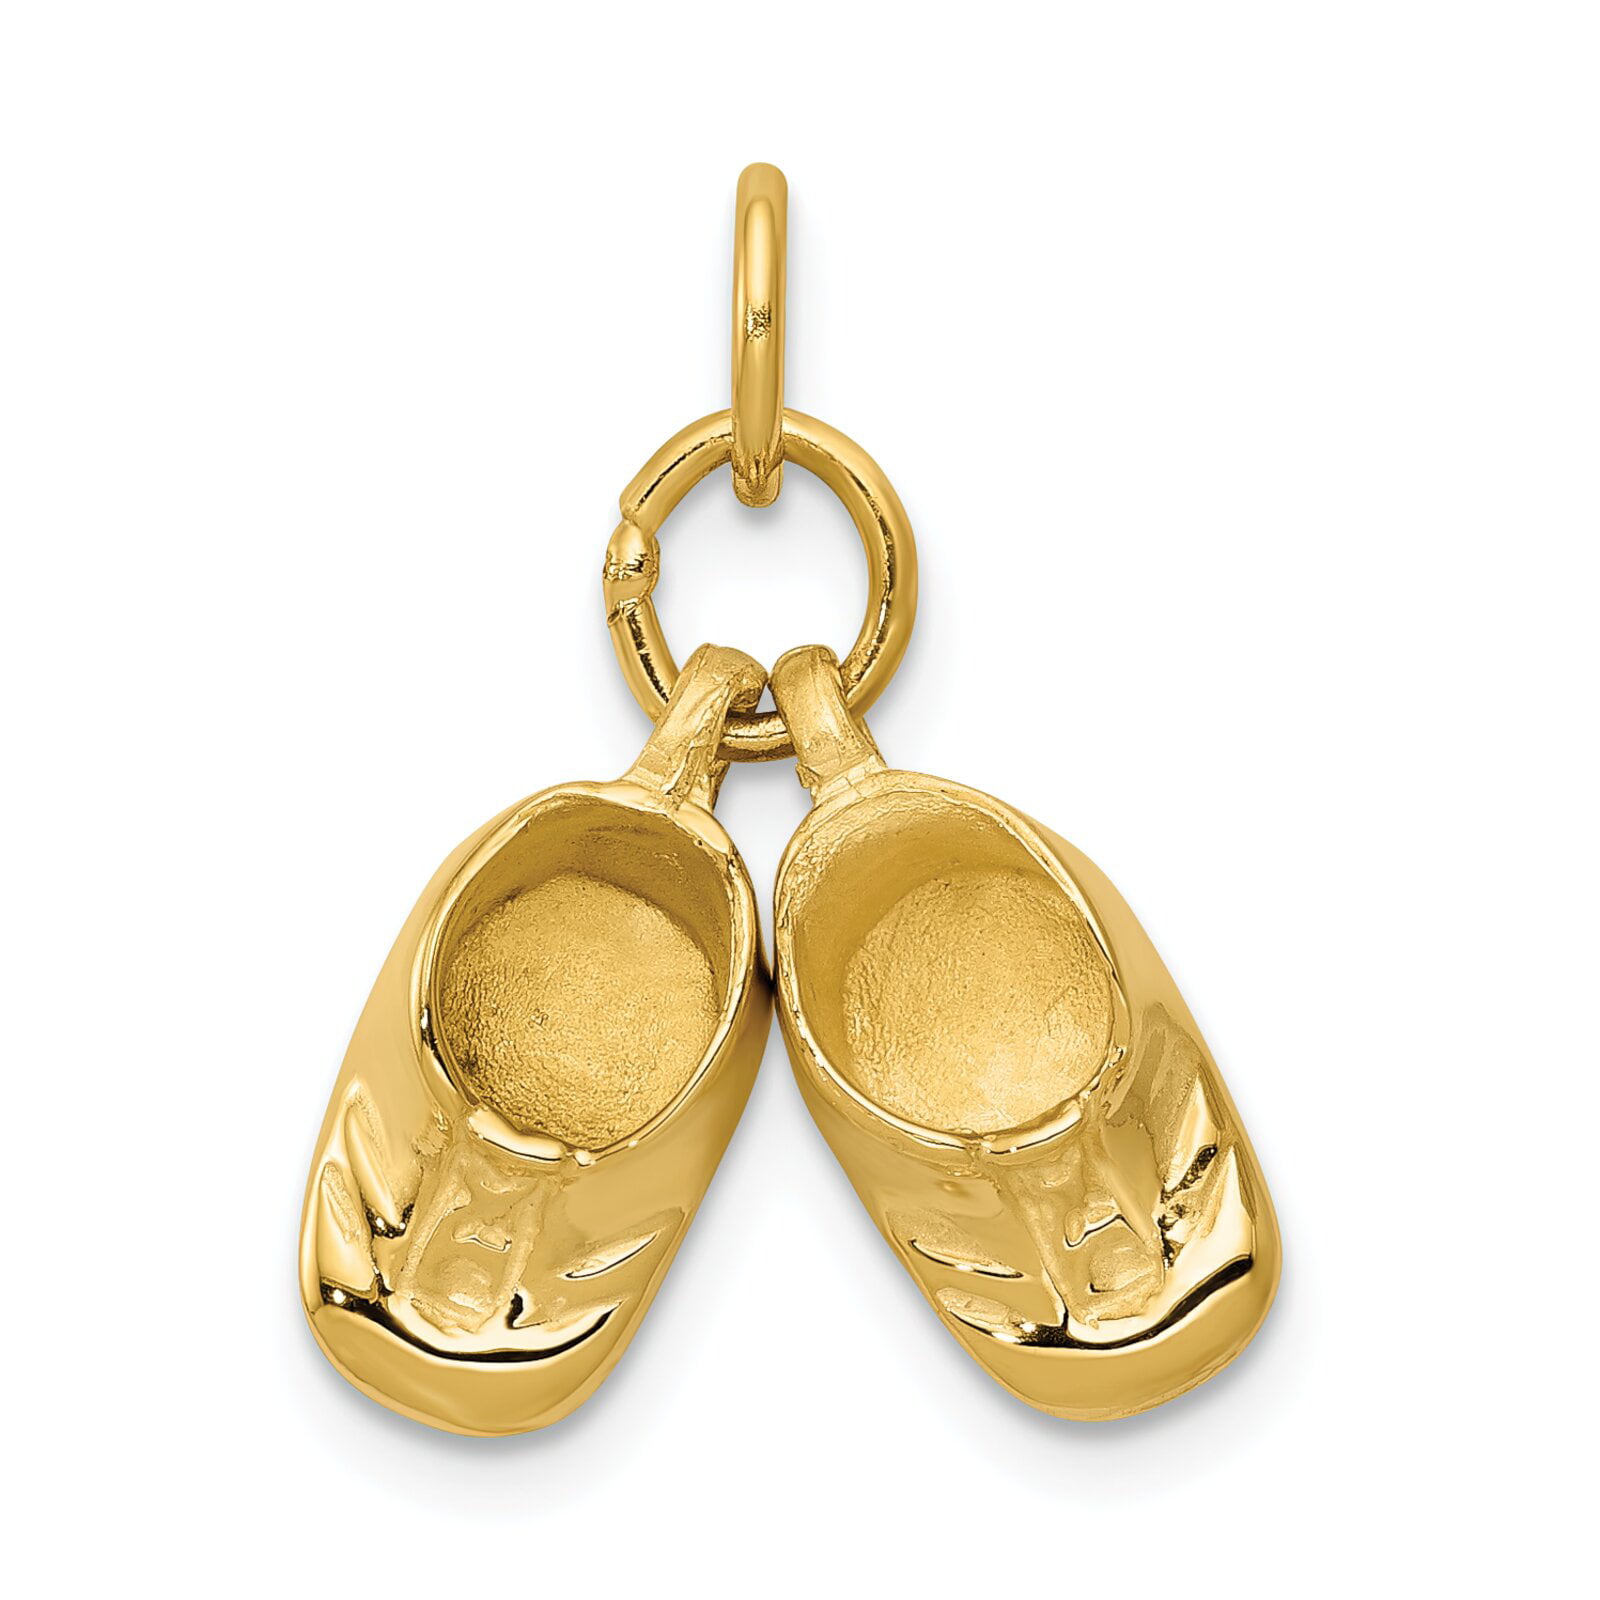 14K Gold Baby Shoes Charm Family Pendant Jewelry - Walmart.com